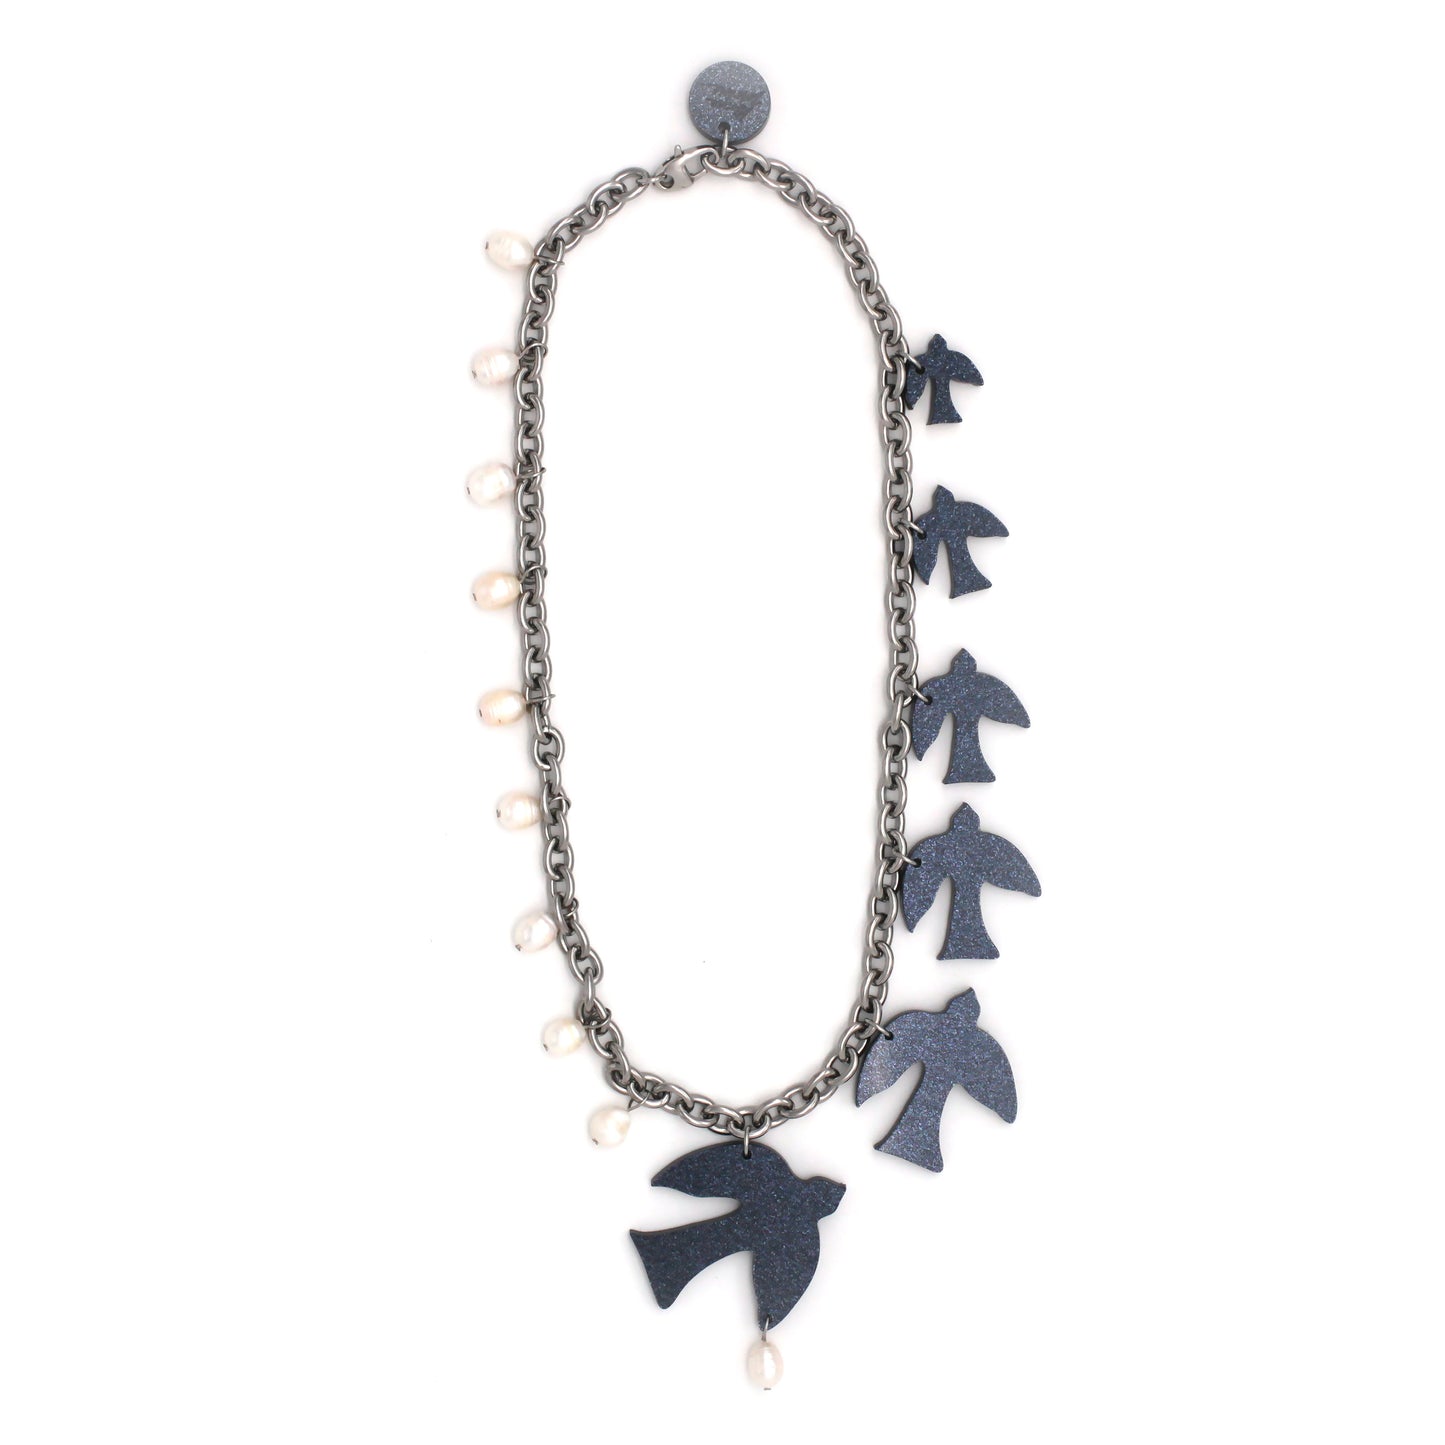 Dark blue glittery acrylic, laser-cut birds, and white freshwater pearls hanging on a thick steel chain on a white background.